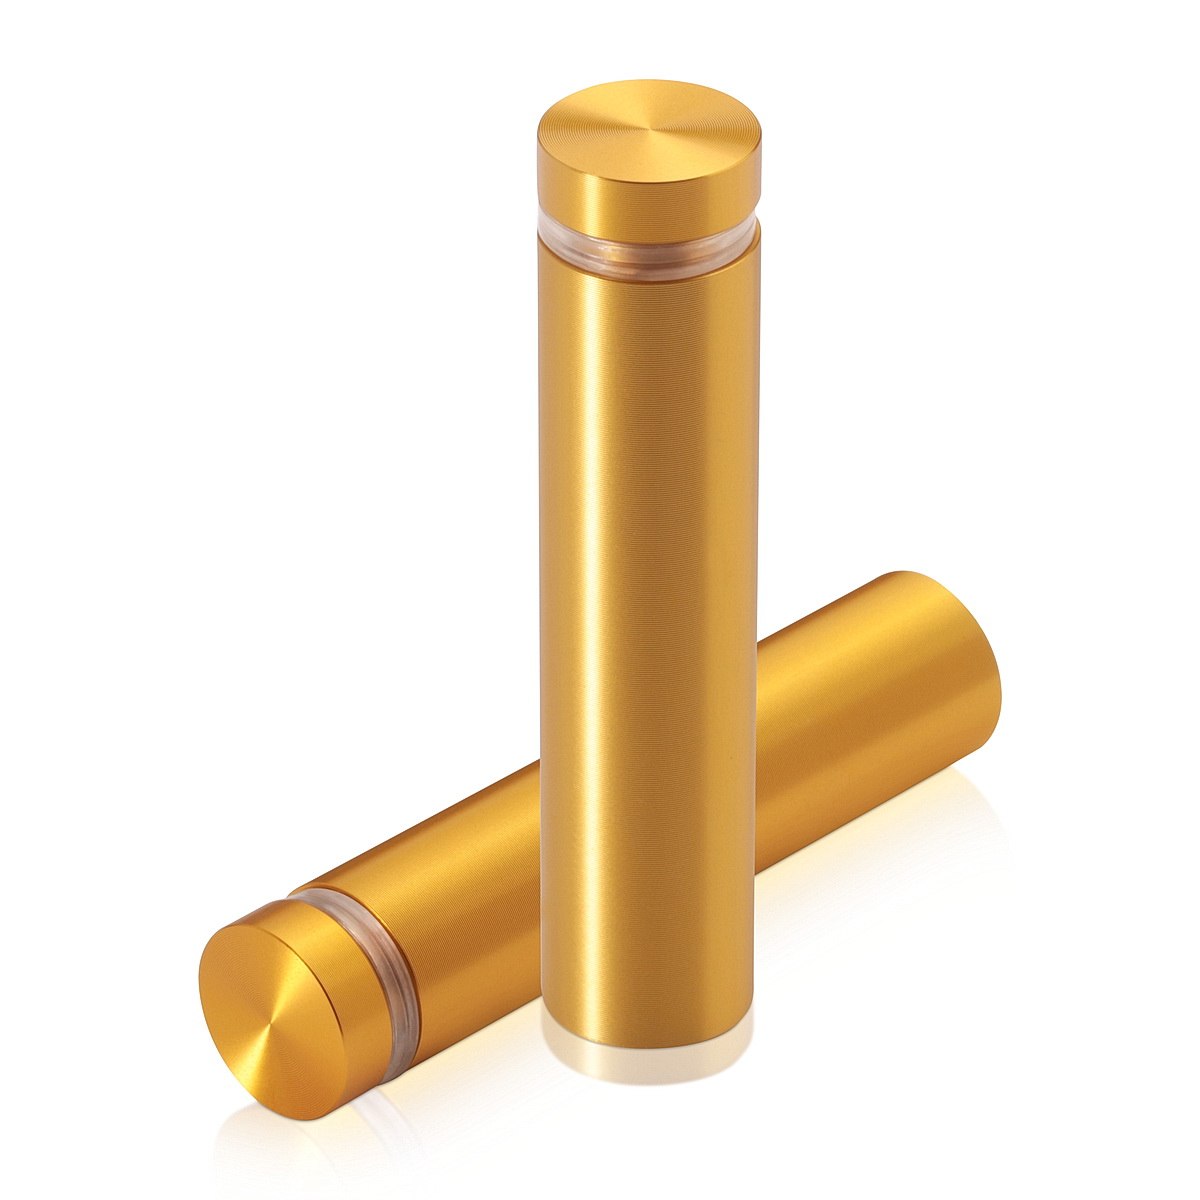 5/8'' Diameter X 2-1/2'' Barrel Length, Aluminum Flat Head Standoffs, Gold Anodized Finish Easy Fasten Standoff (For Inside / Outside use) Tamper Proof Standoff [Required Material Hole Size: 7/16'']